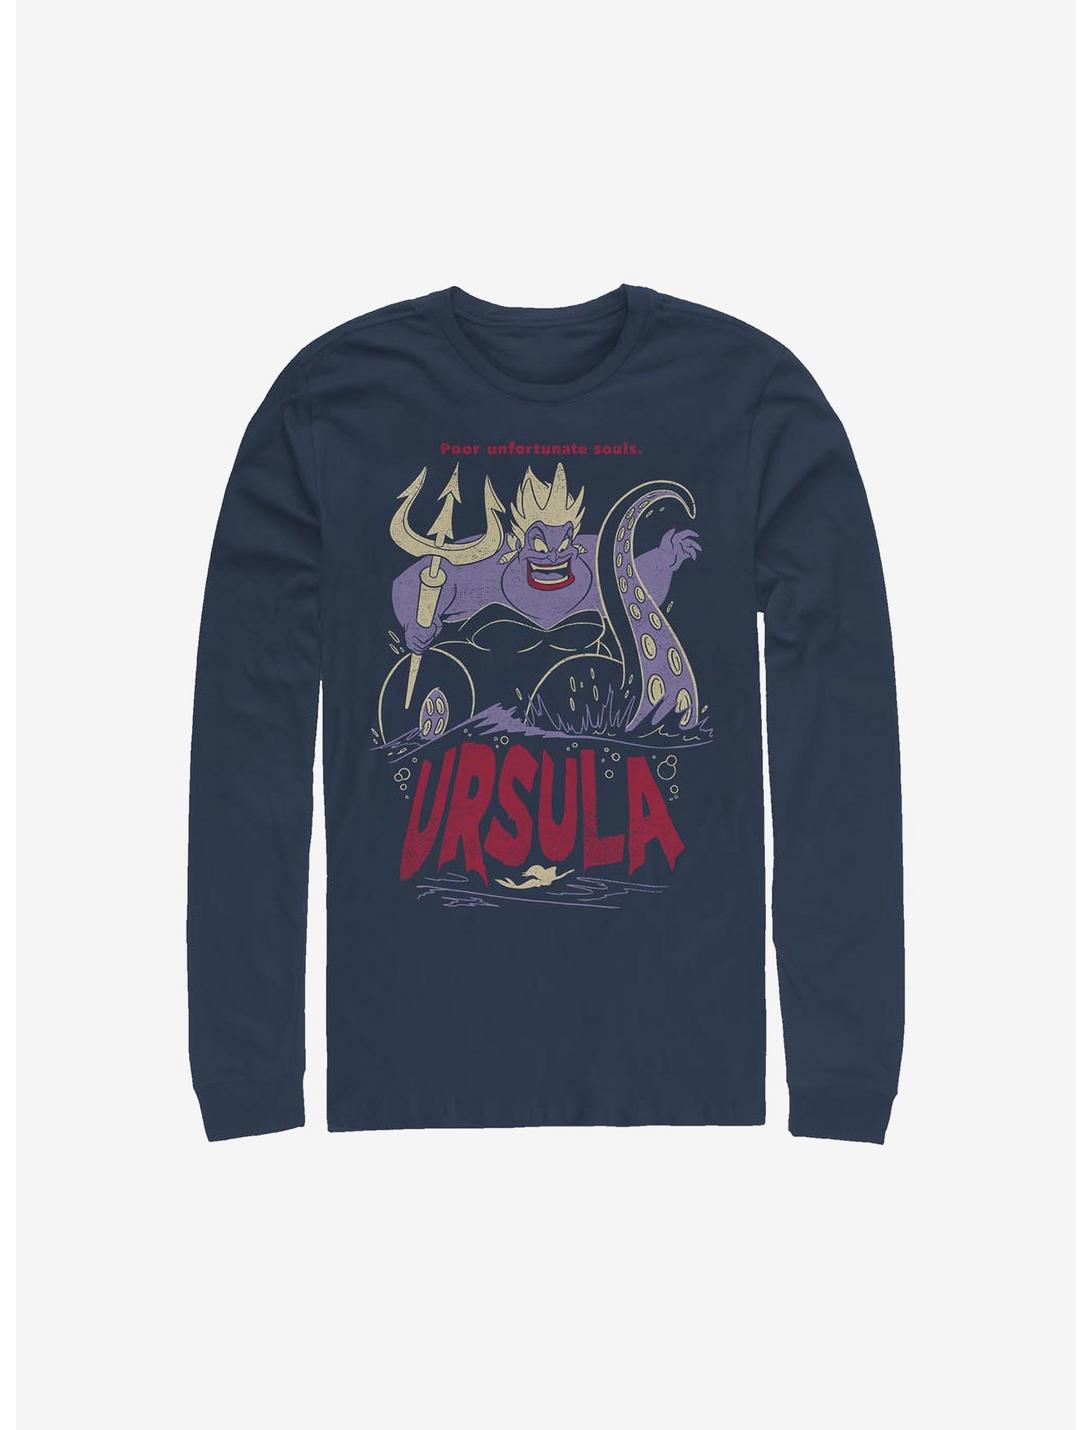 Disney The Little Mermaid Ursula The Sea Witch Long-Sleeve T-Shirt, NAVY, hi-res